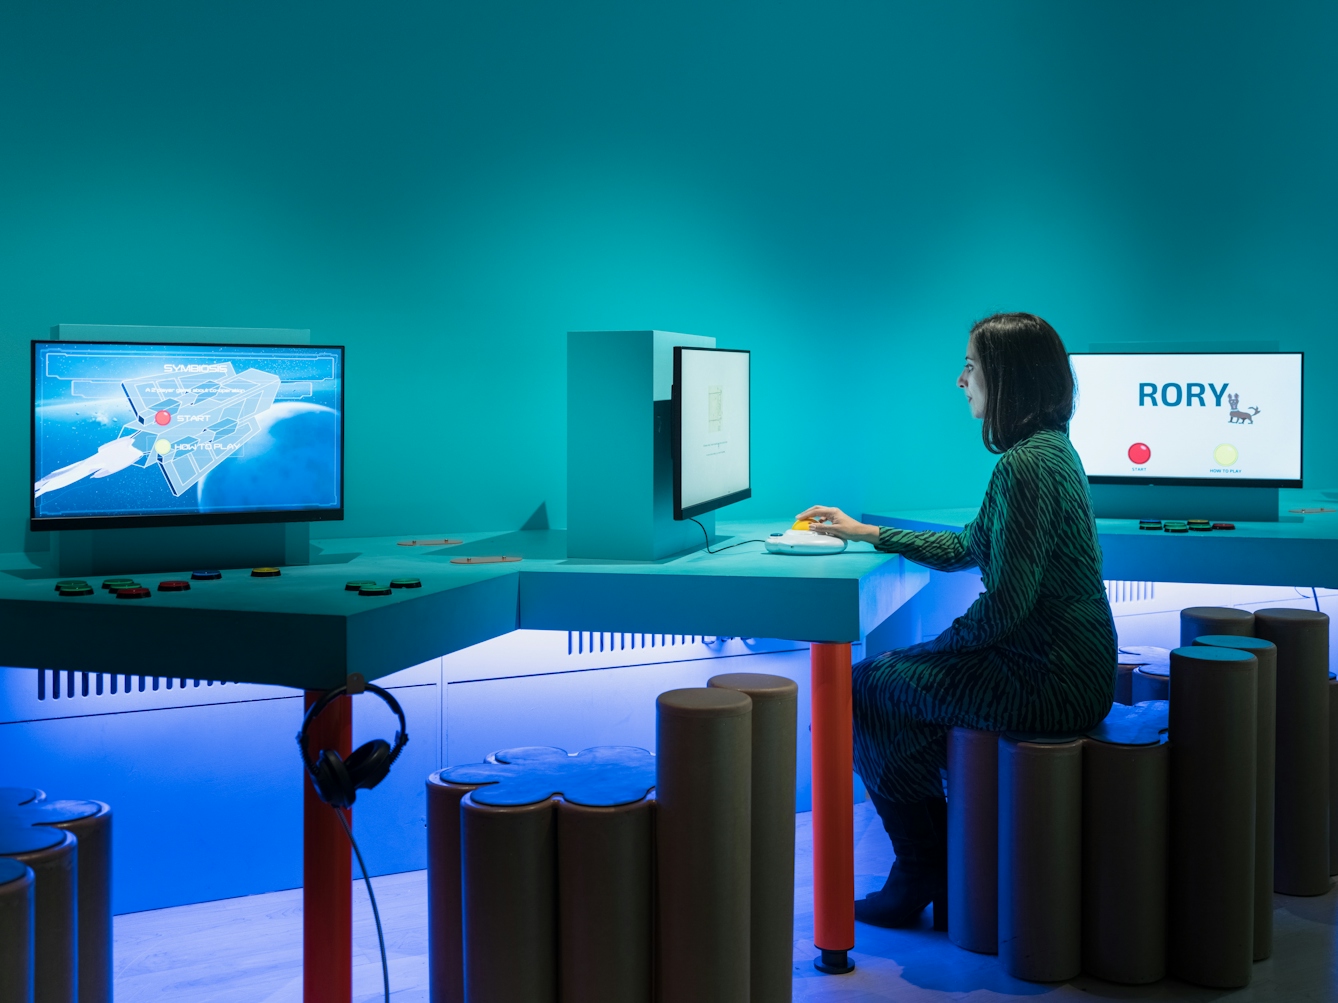 Photograph of a woman in an exhibition space seated at a computer monitor with her hand on a large track ball. To her left and right are two other screens with buttons on the table top in front of them.